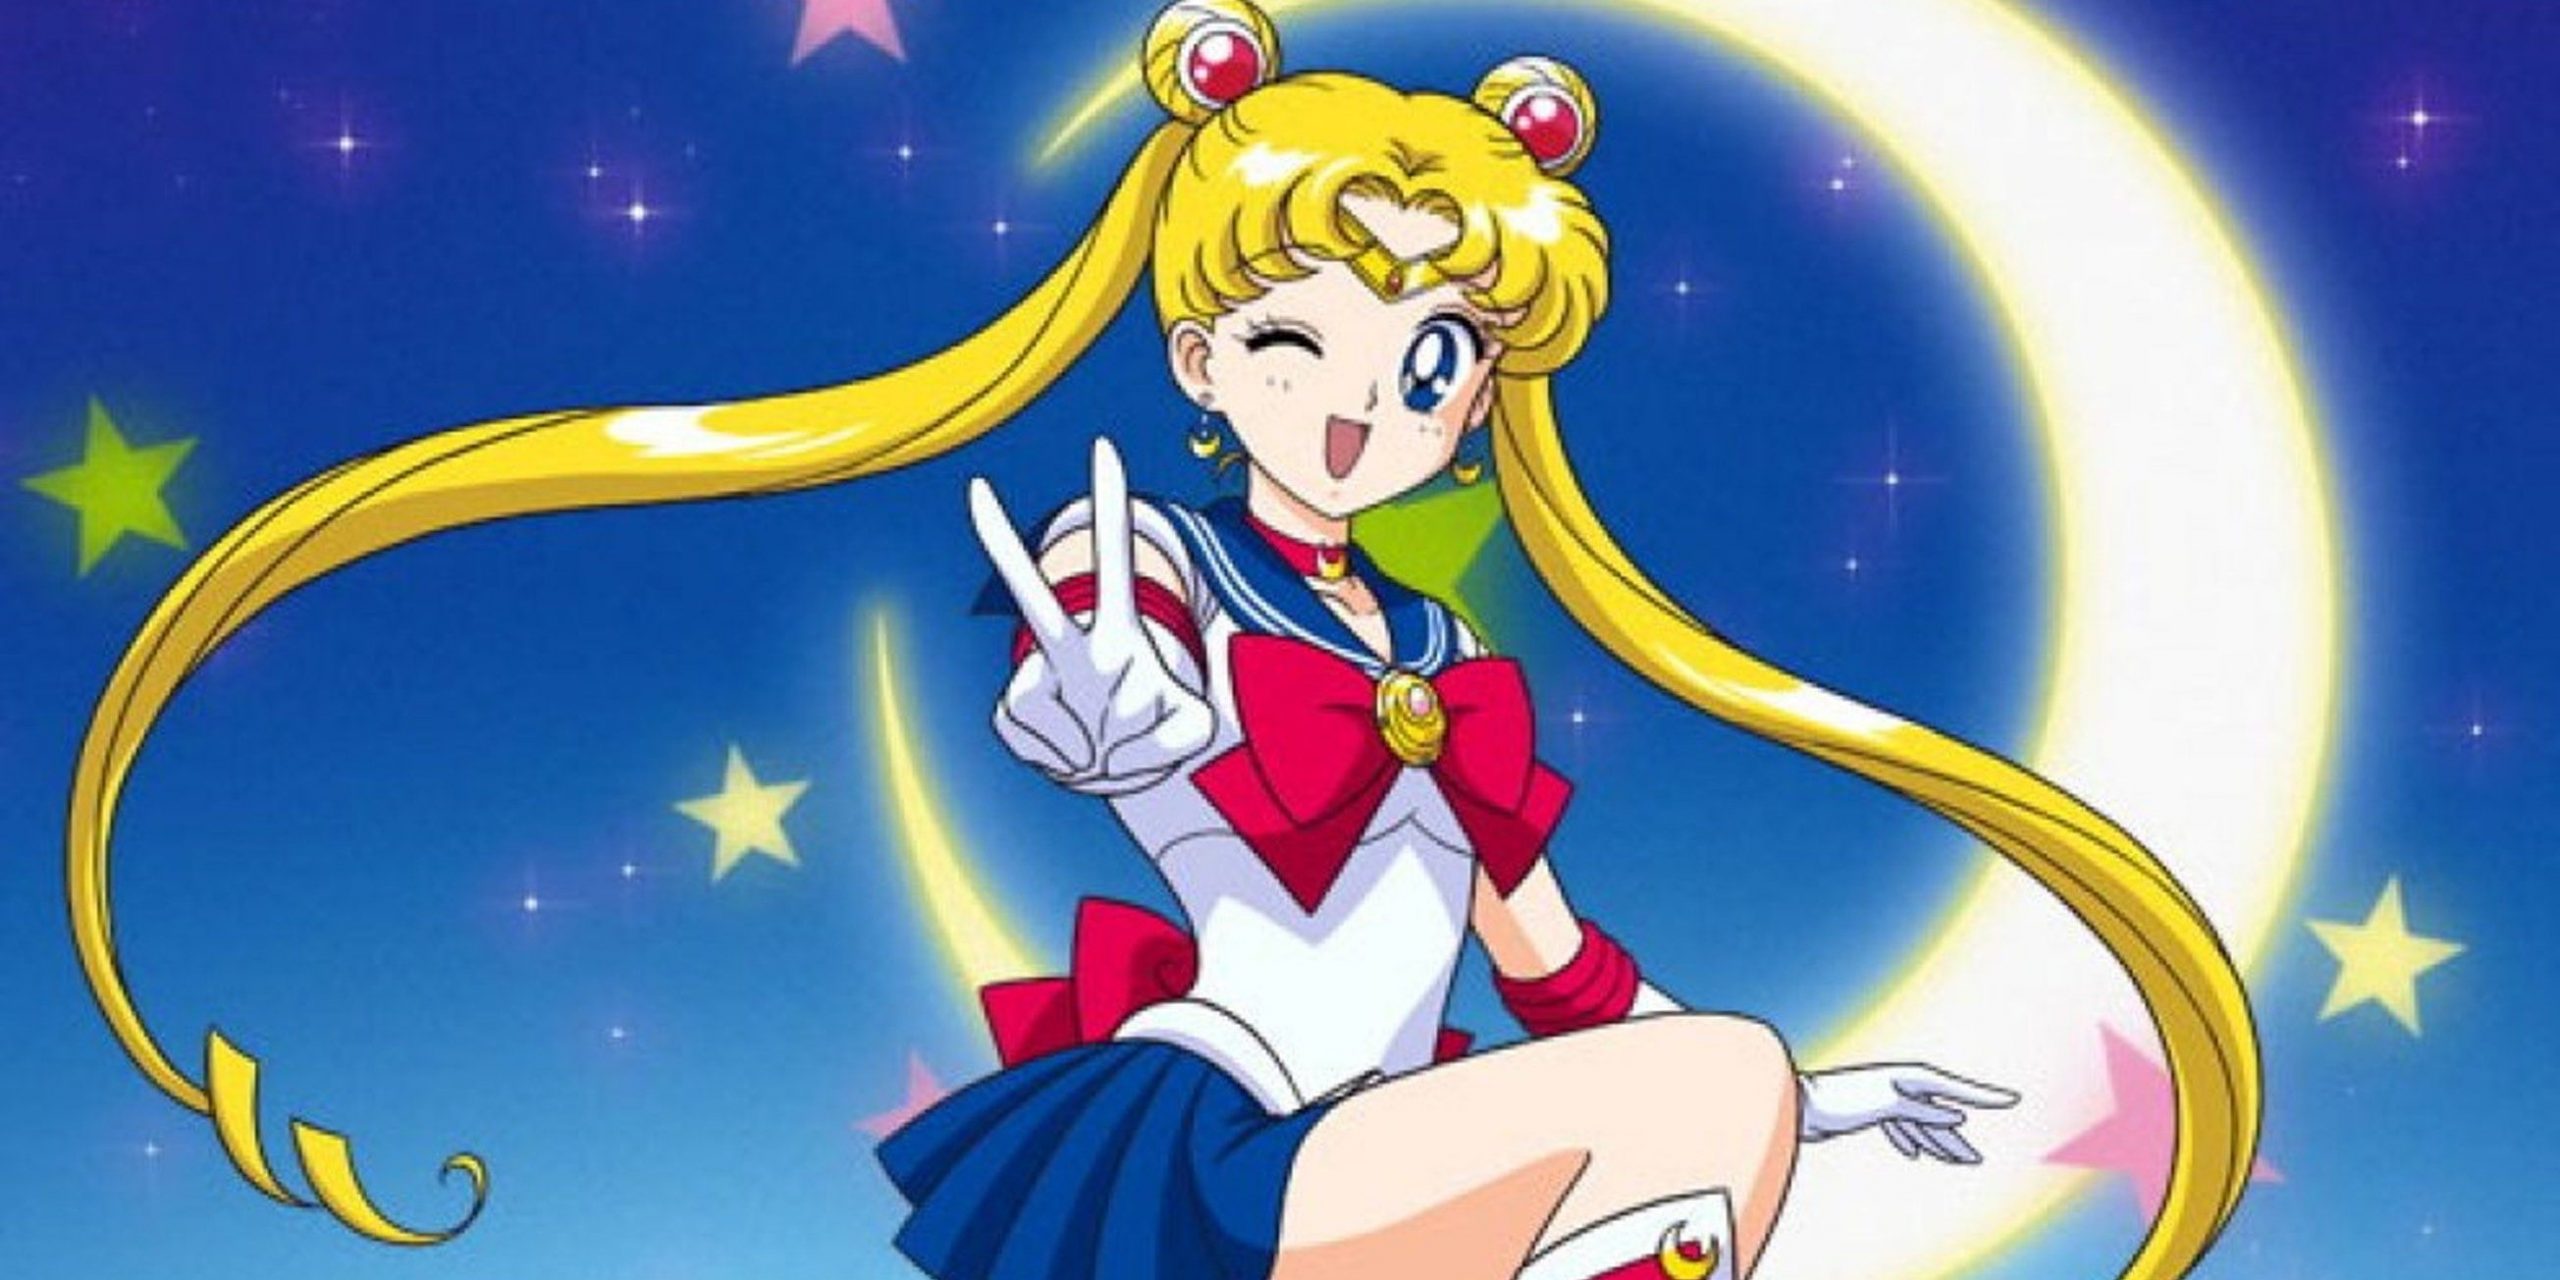 #”Sailor Moon” with quota success at RTLZWEI